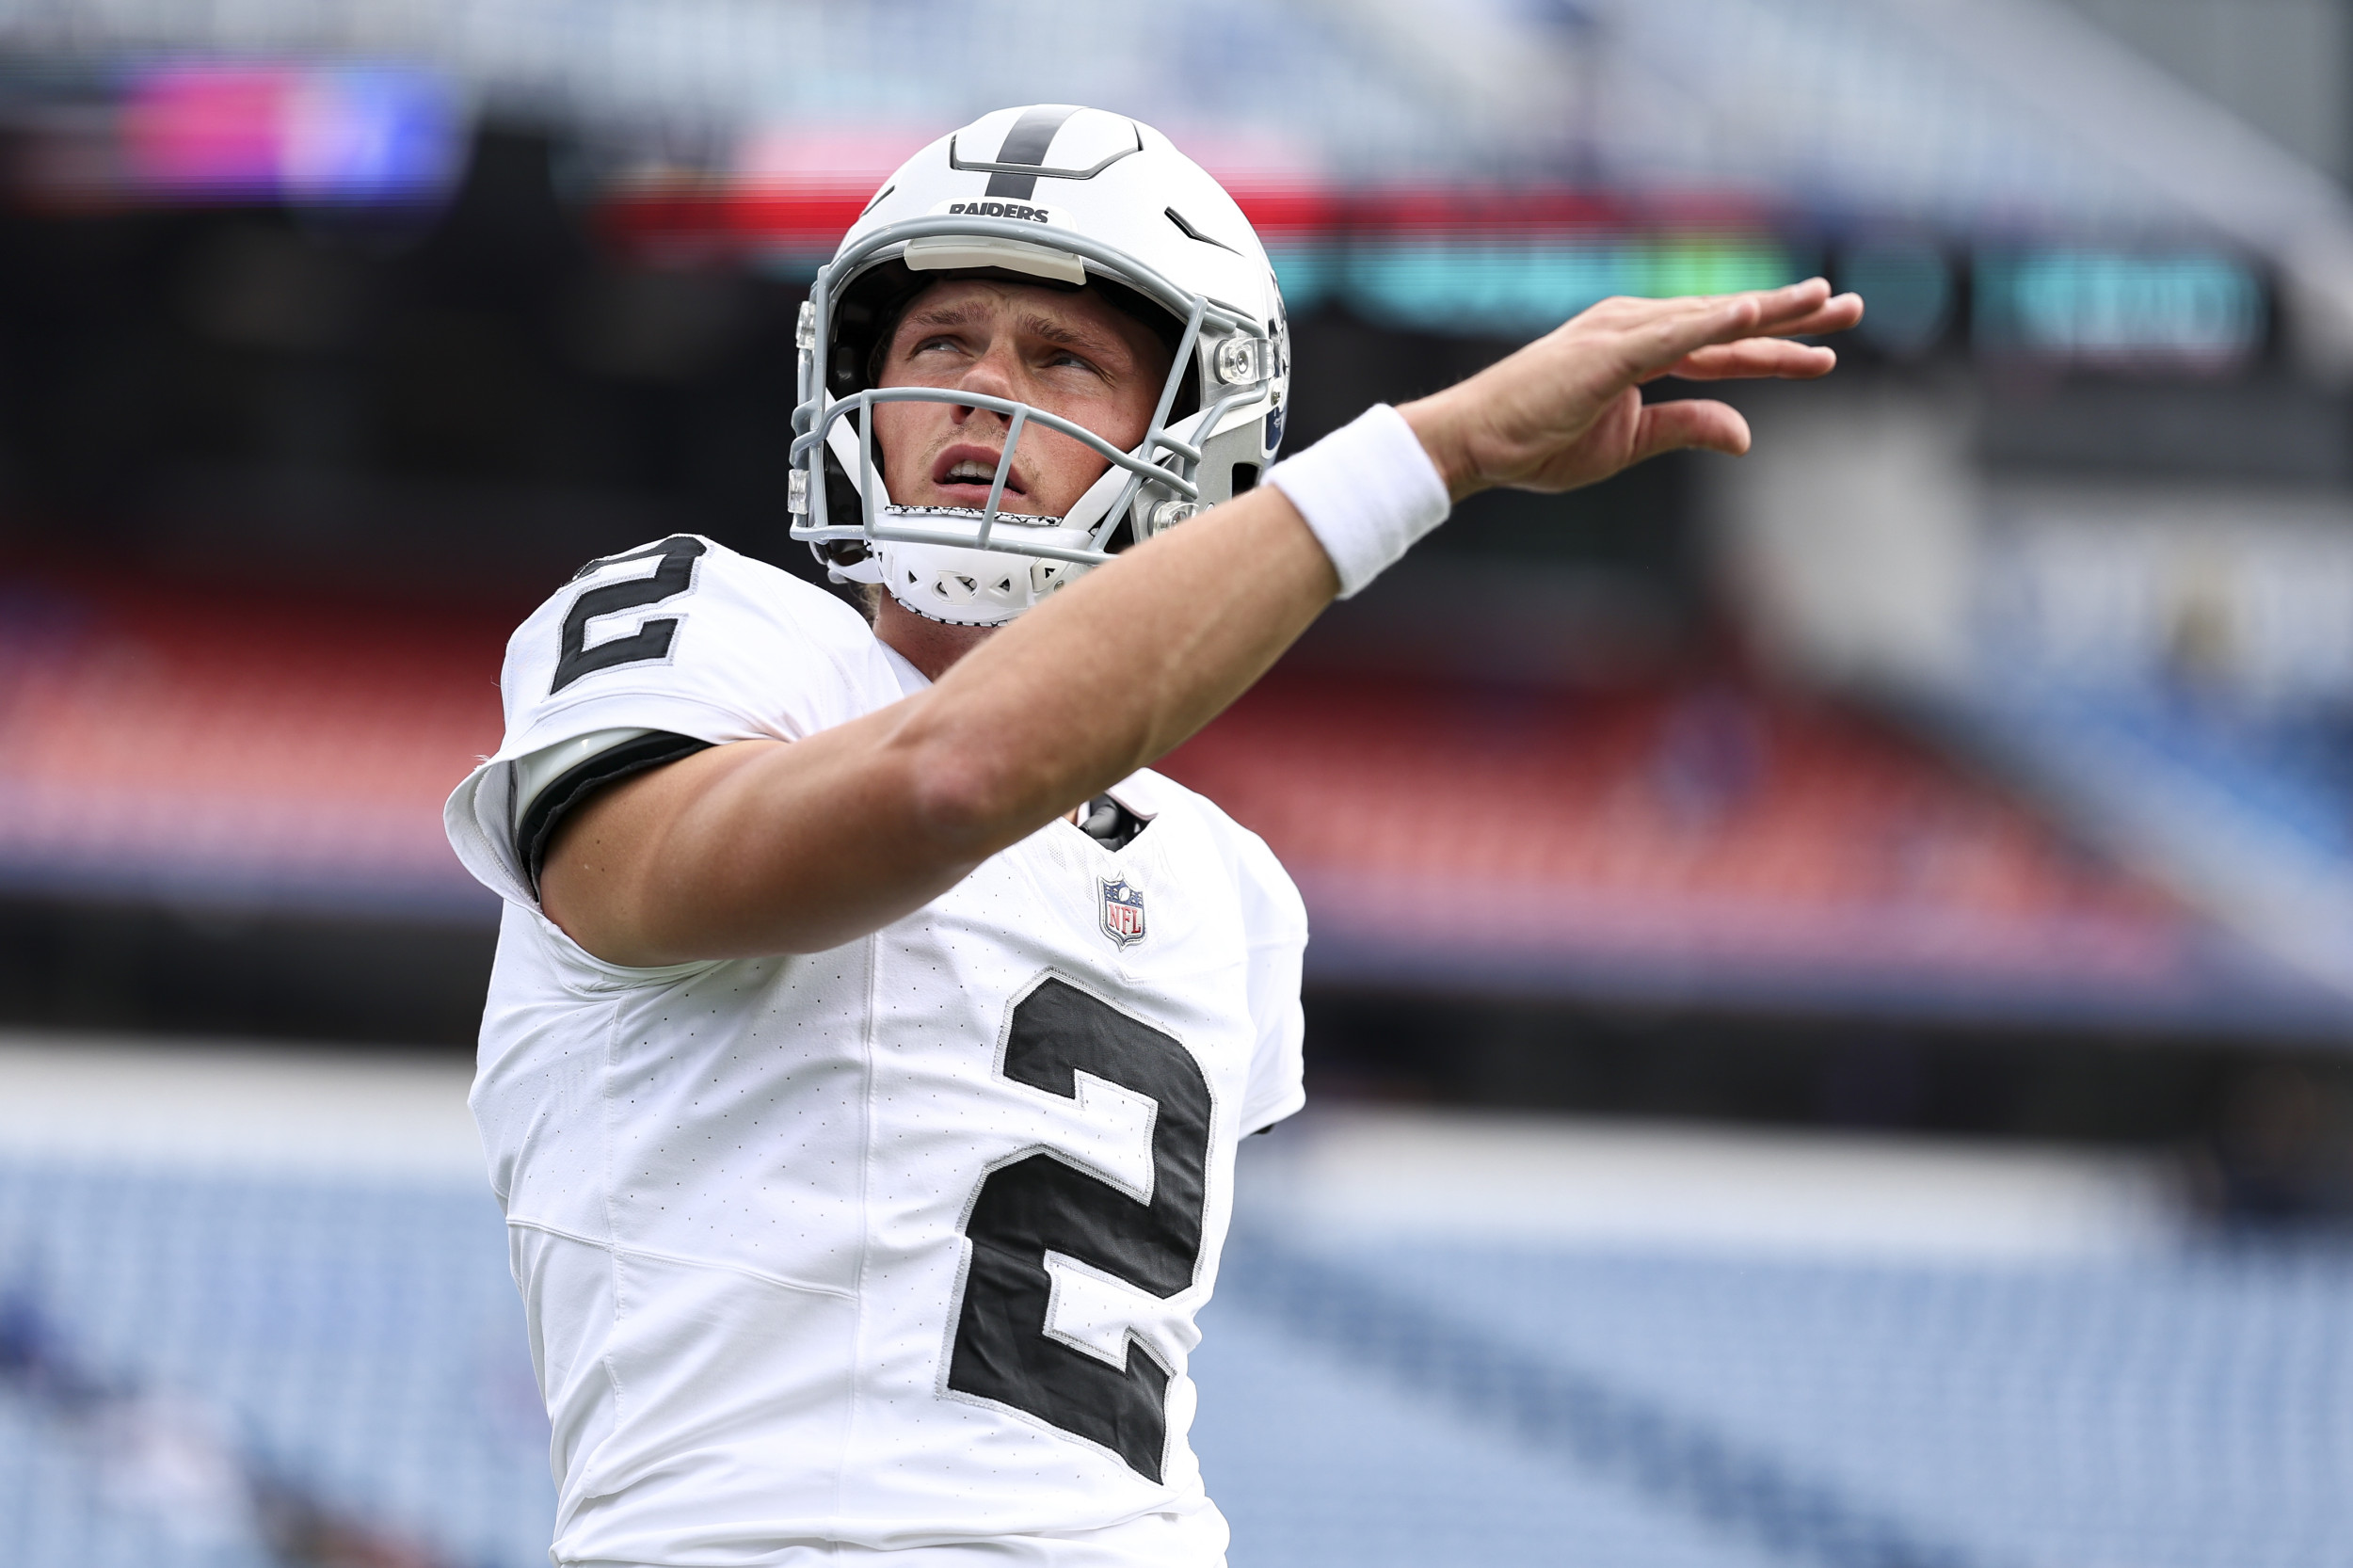 Raiders vs Cowboys live stream is today: How to watch NFL